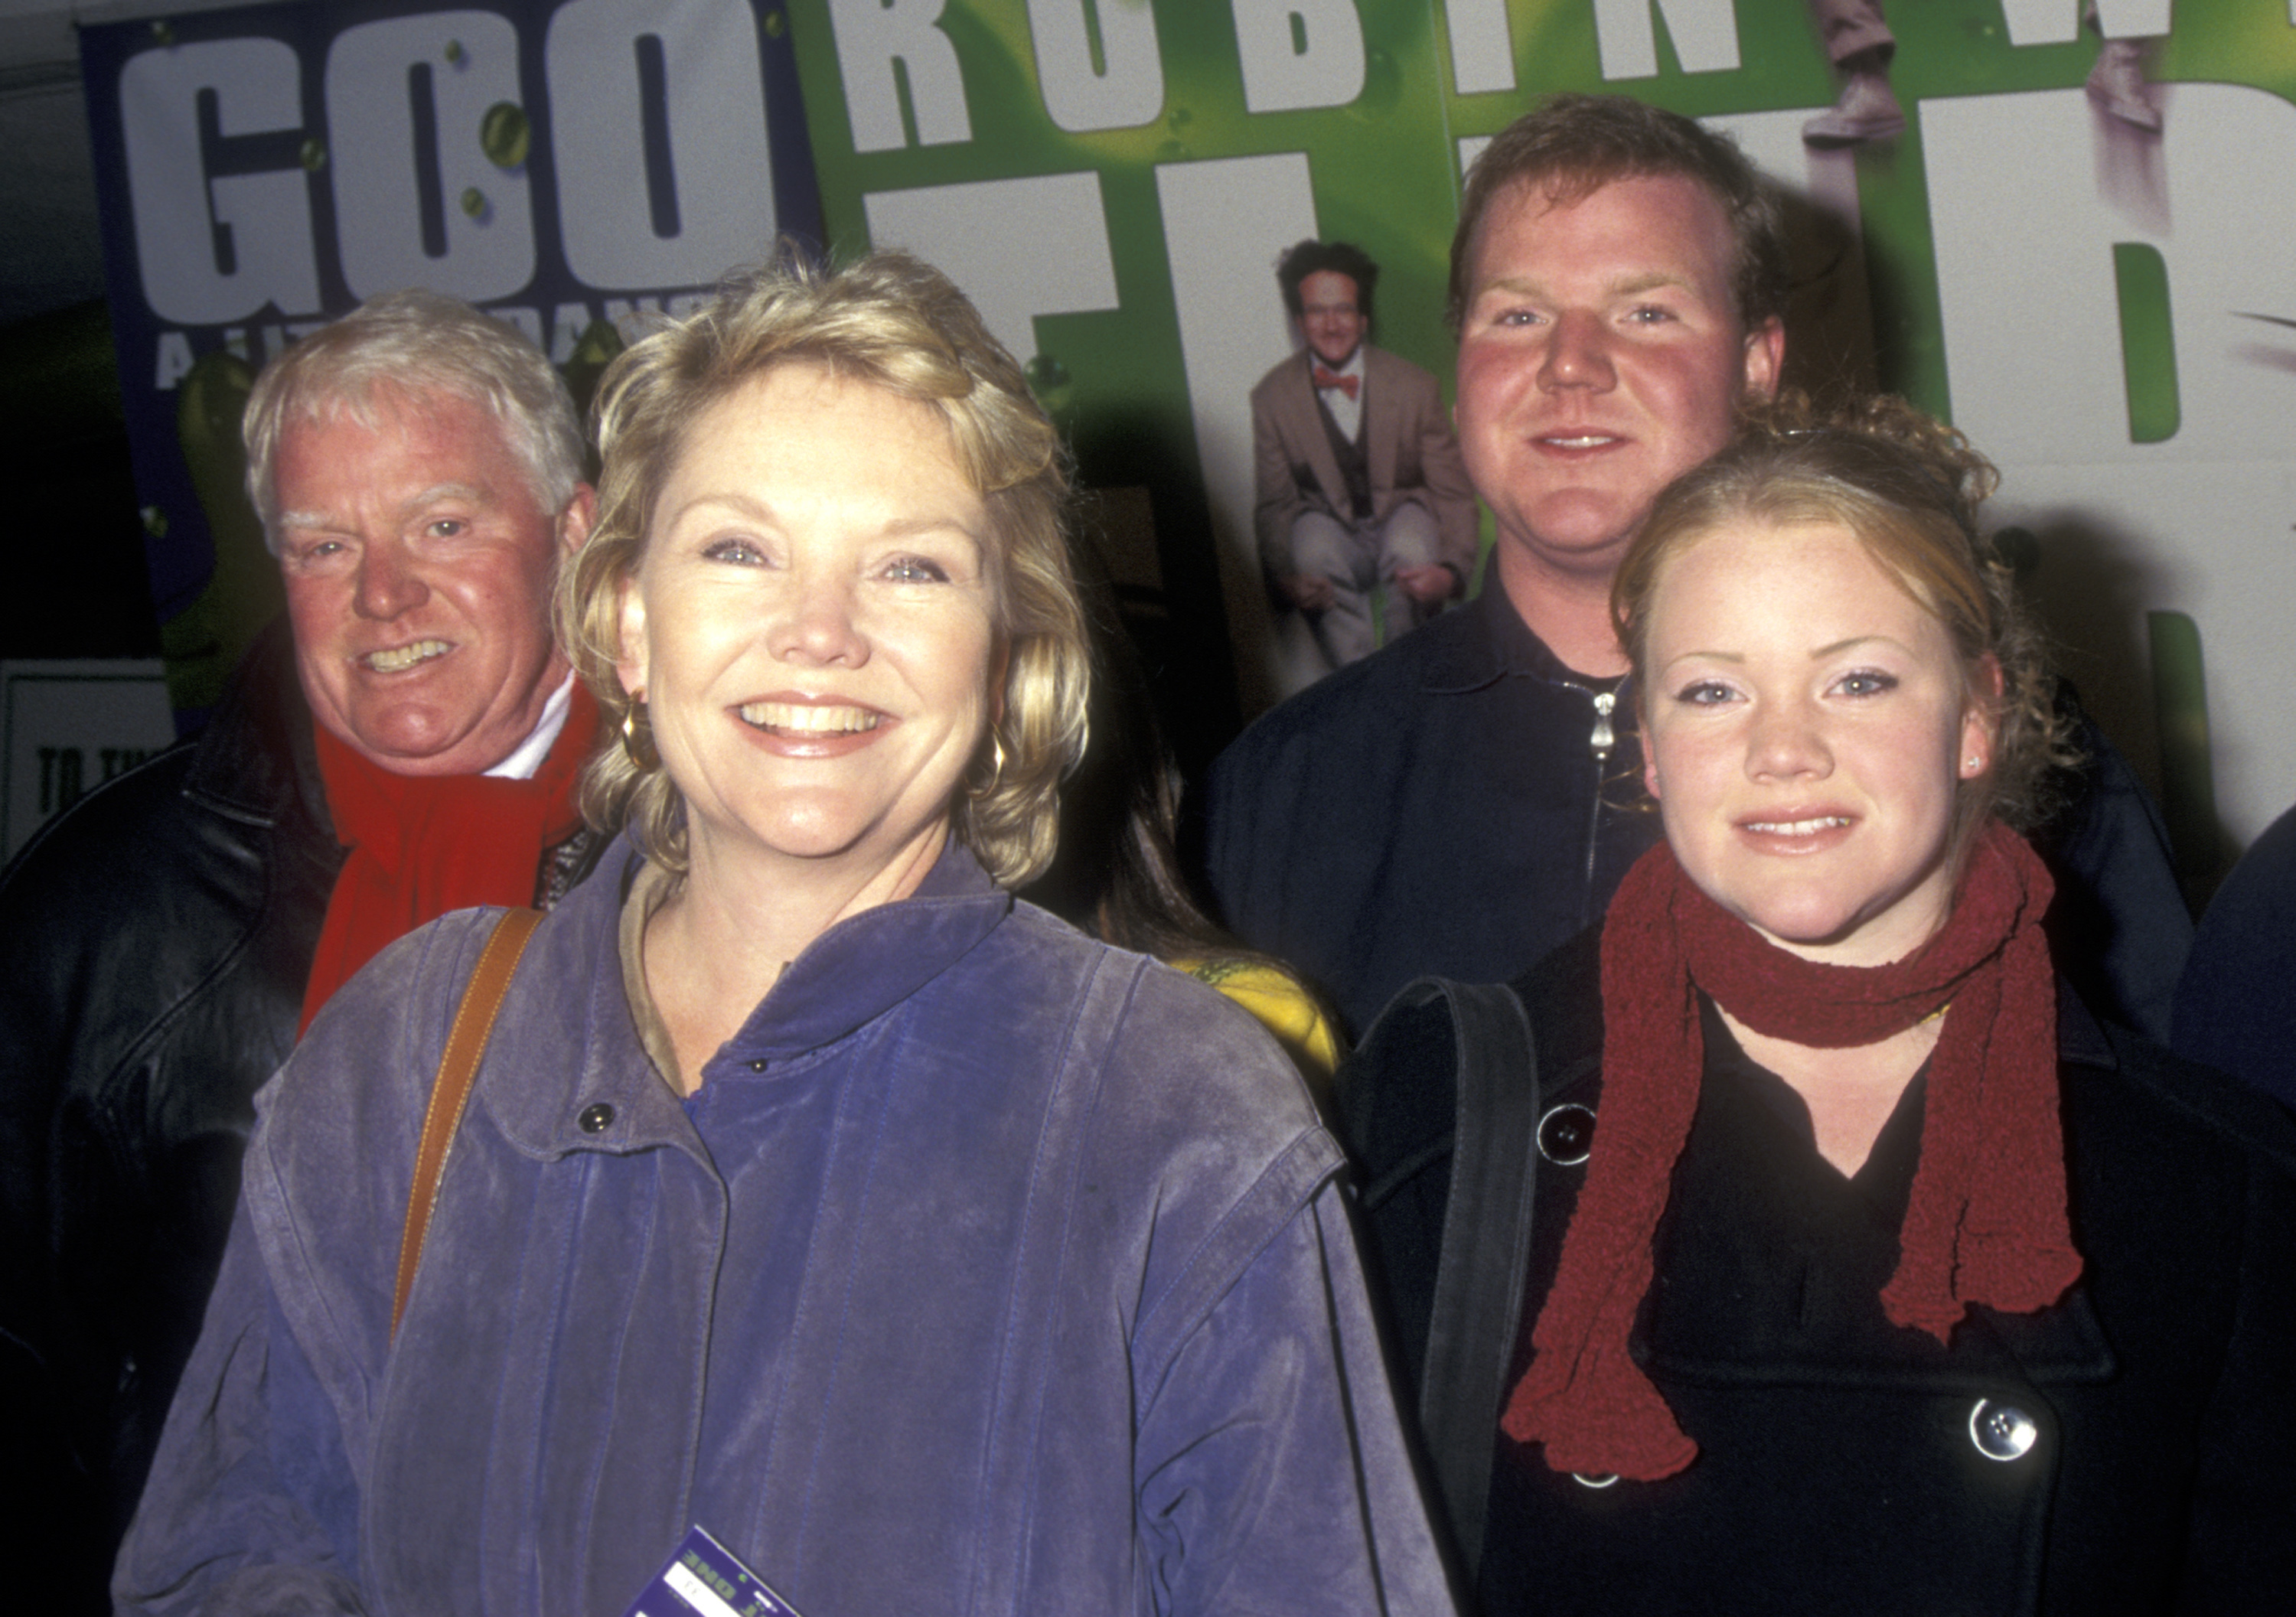 Brian Davies, Erika Slezak, Michael Davies and Amanda Davies at the premiere of "Flubber" in New York City on November 16, 1997 | Source: Getty Images